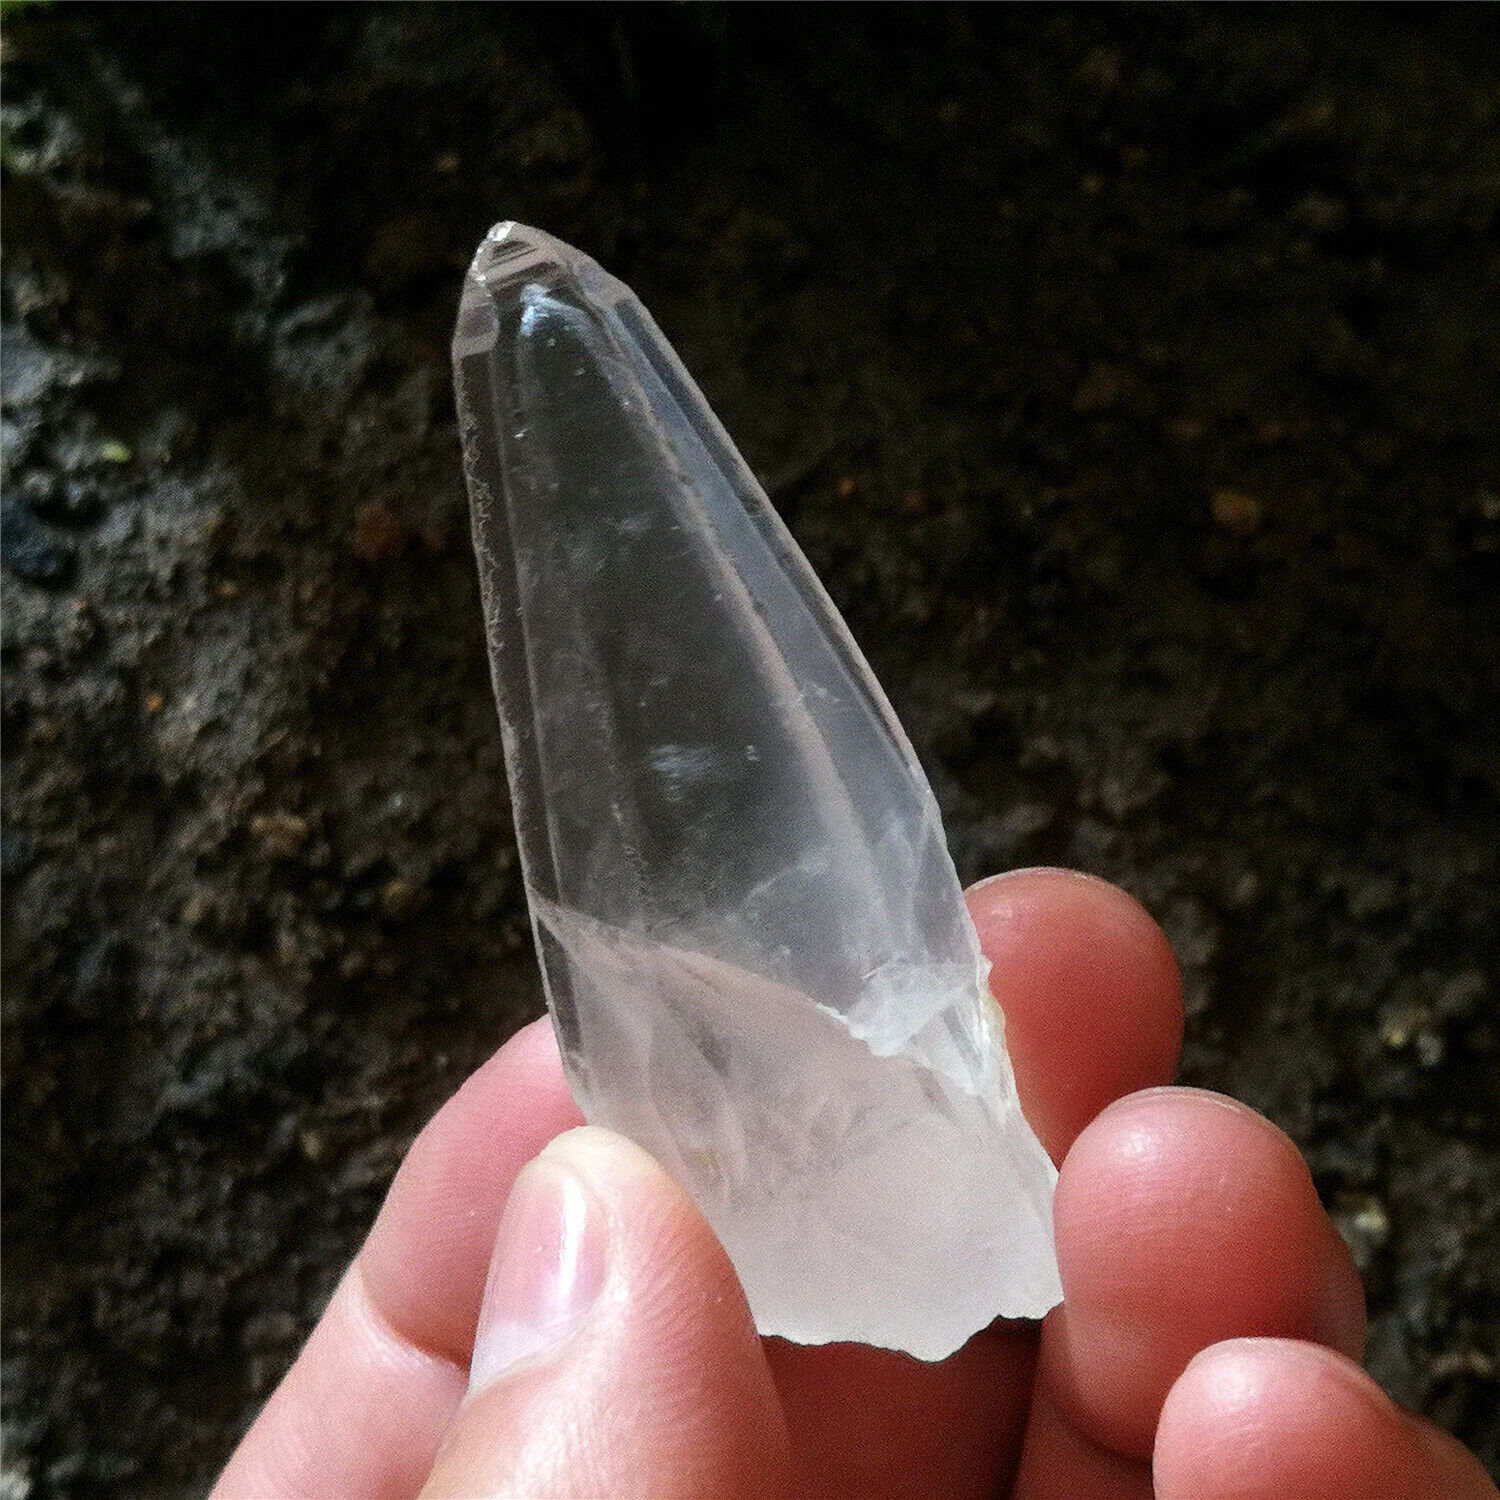 30g 60mm Amazing Natural Clear Quartz Point Include Another Intact Quartz Point